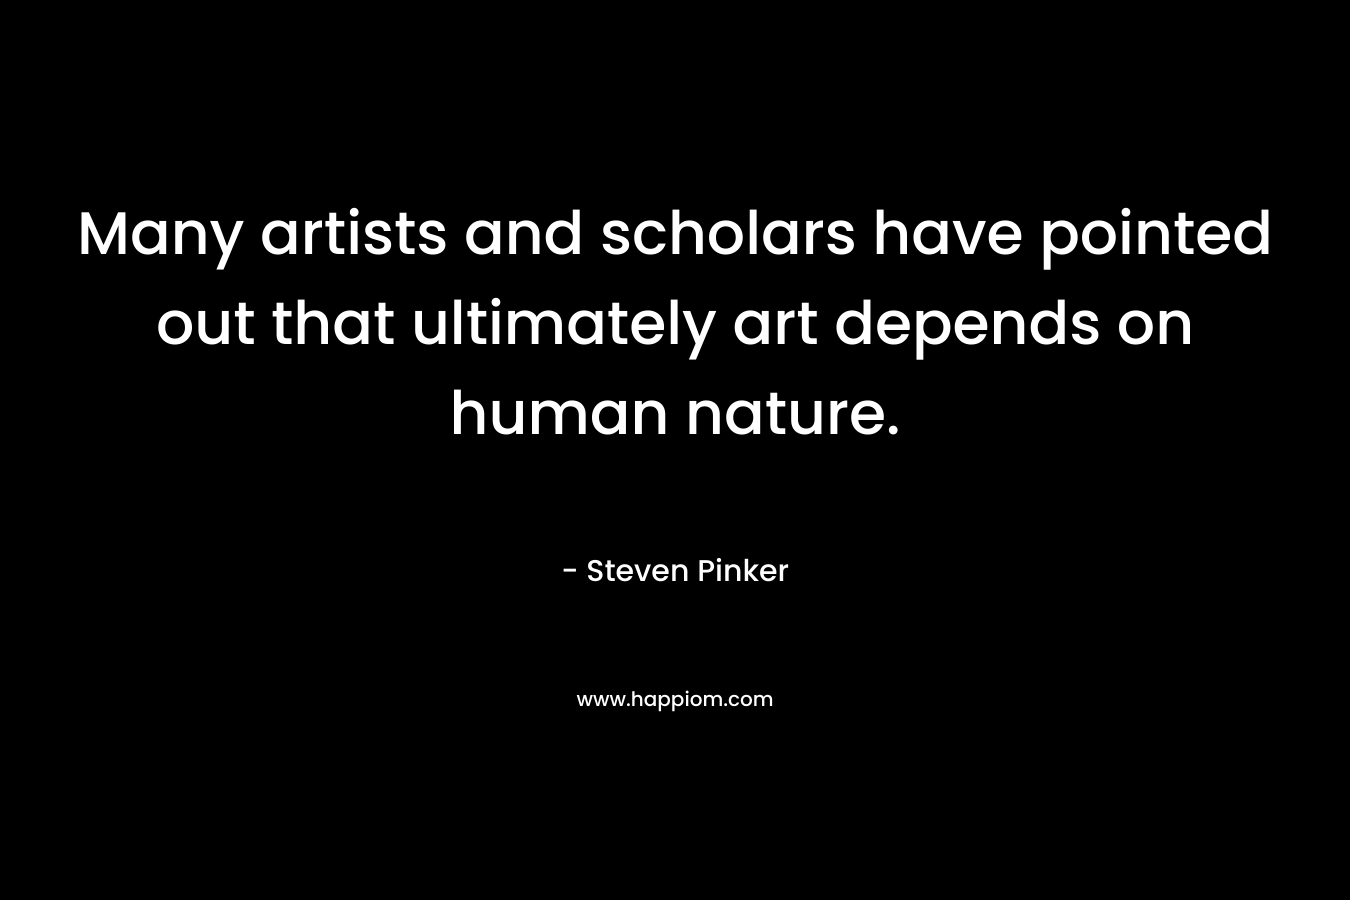 Many artists and scholars have pointed out that ultimately art depends on human nature. – Steven Pinker